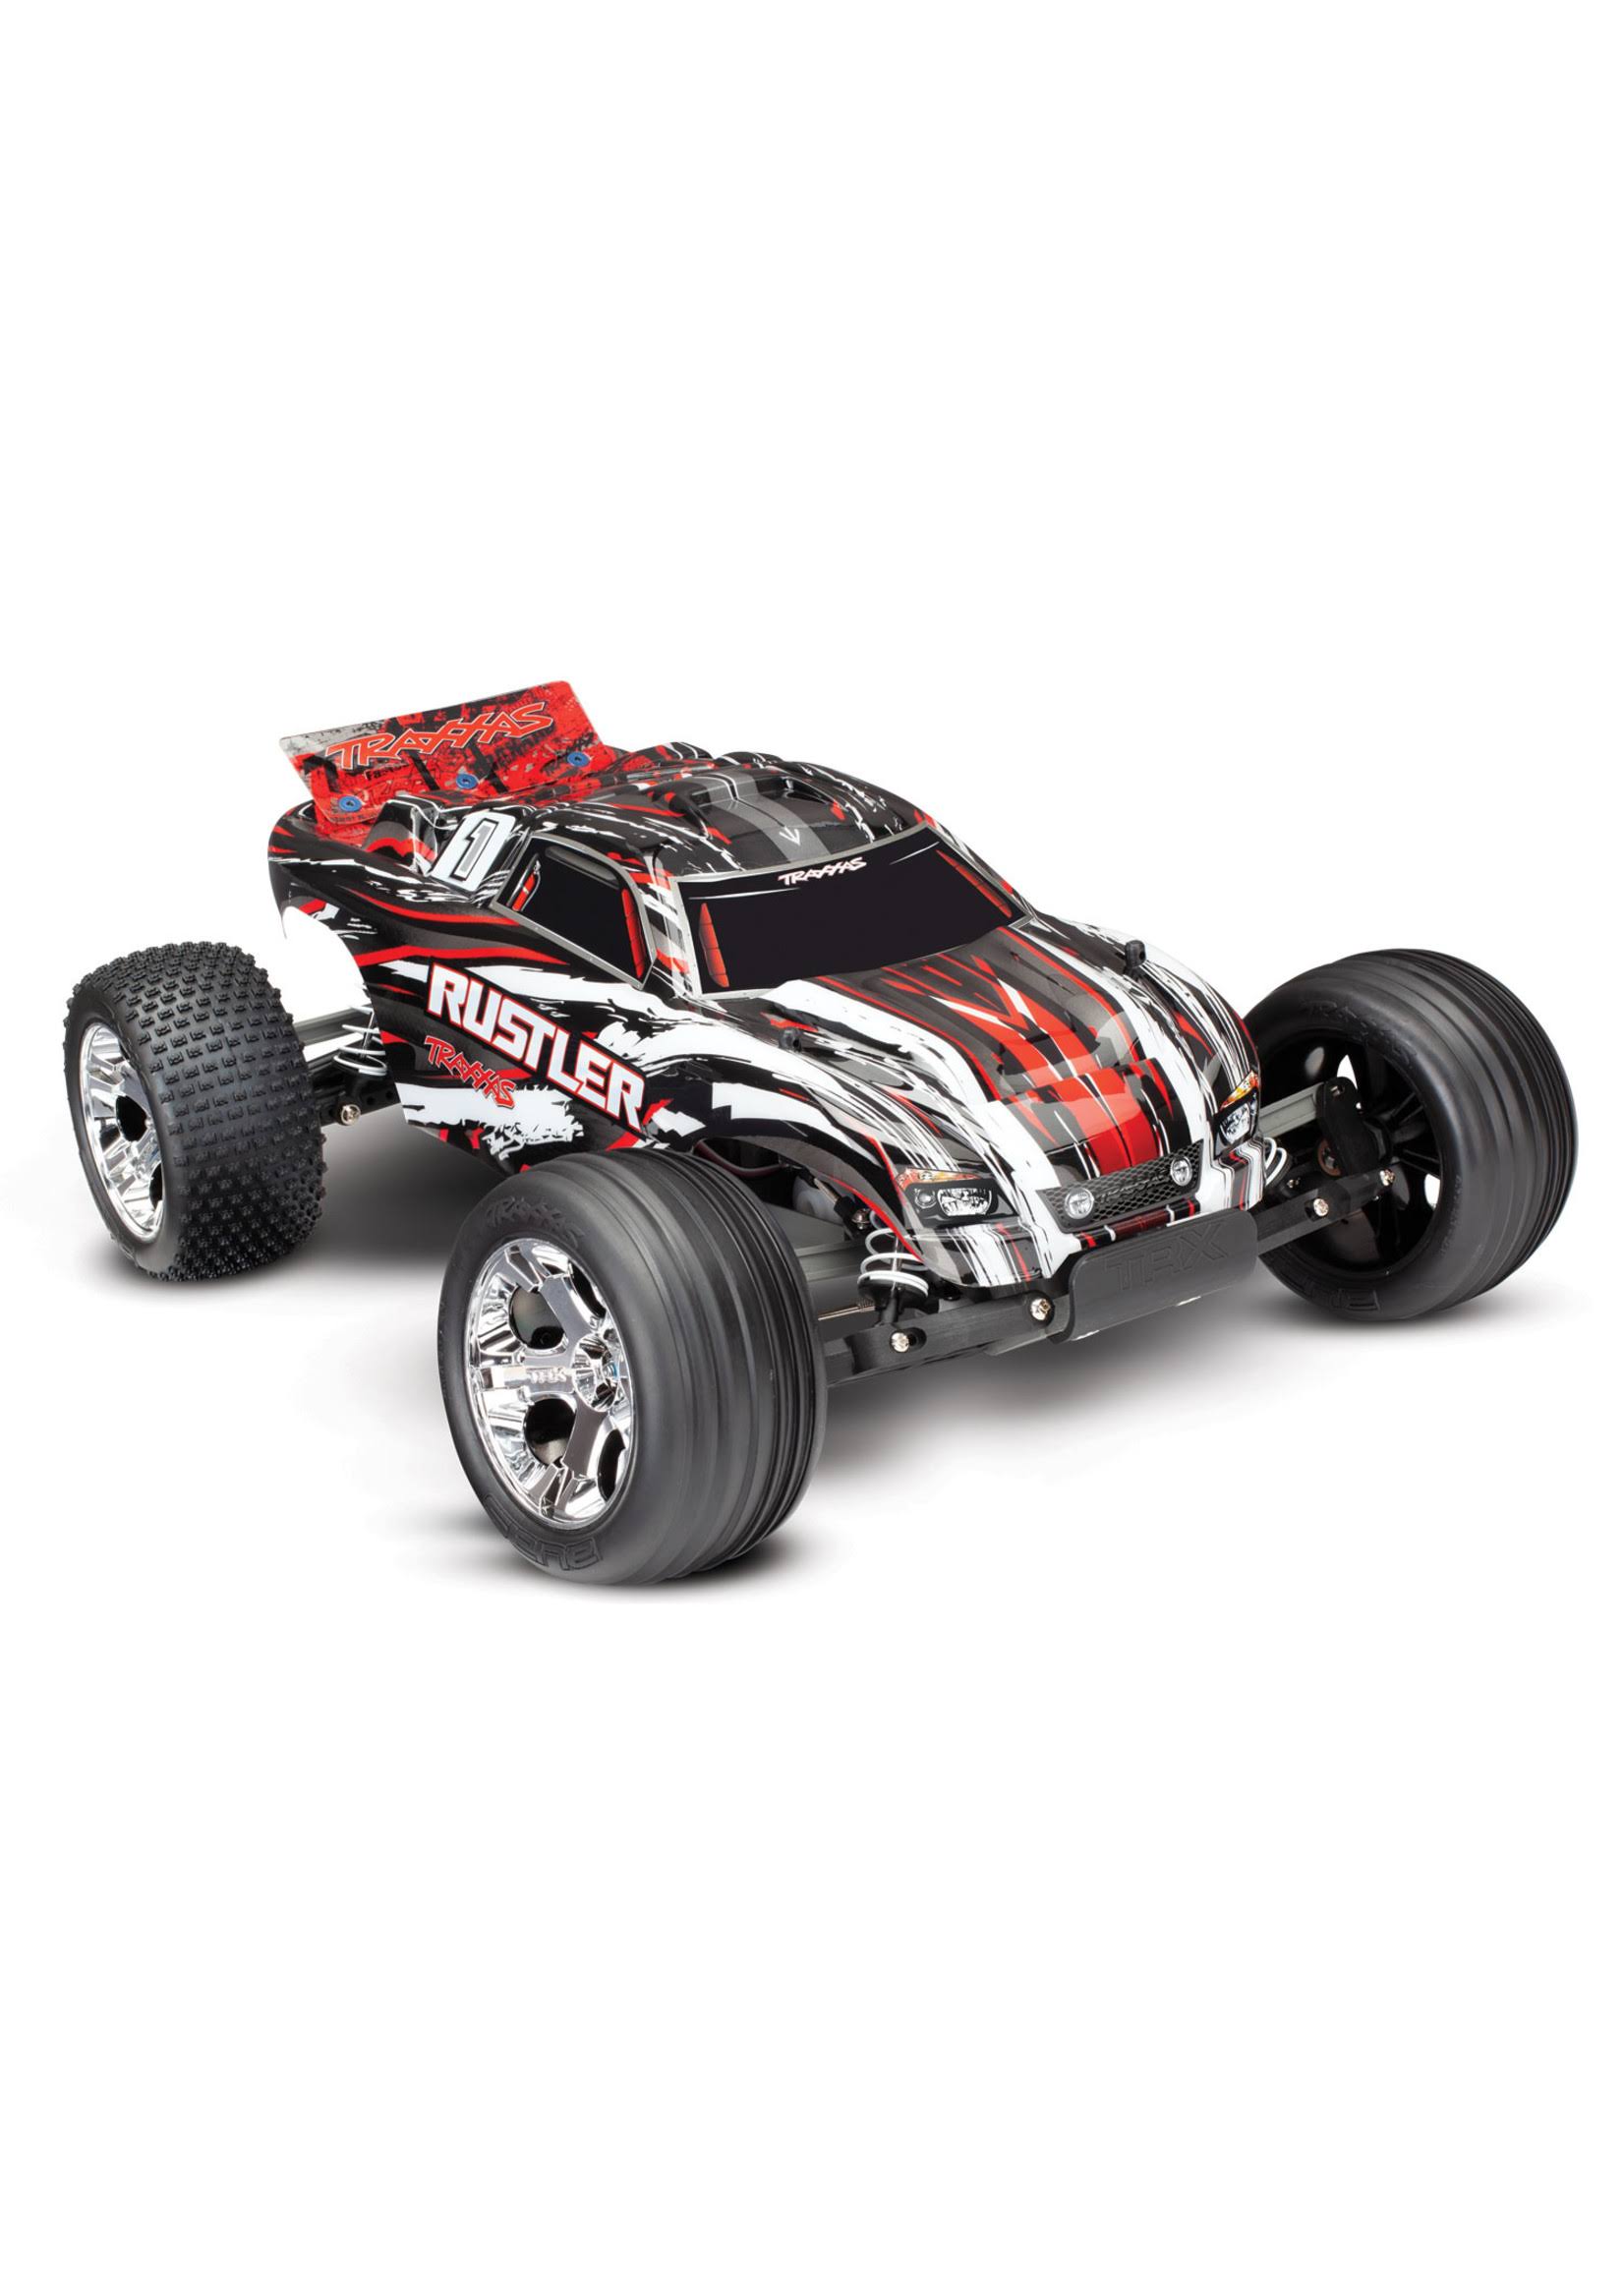 Traxxas Rustler XL-5 with ID Technology RTR 2WD Truck (Red)